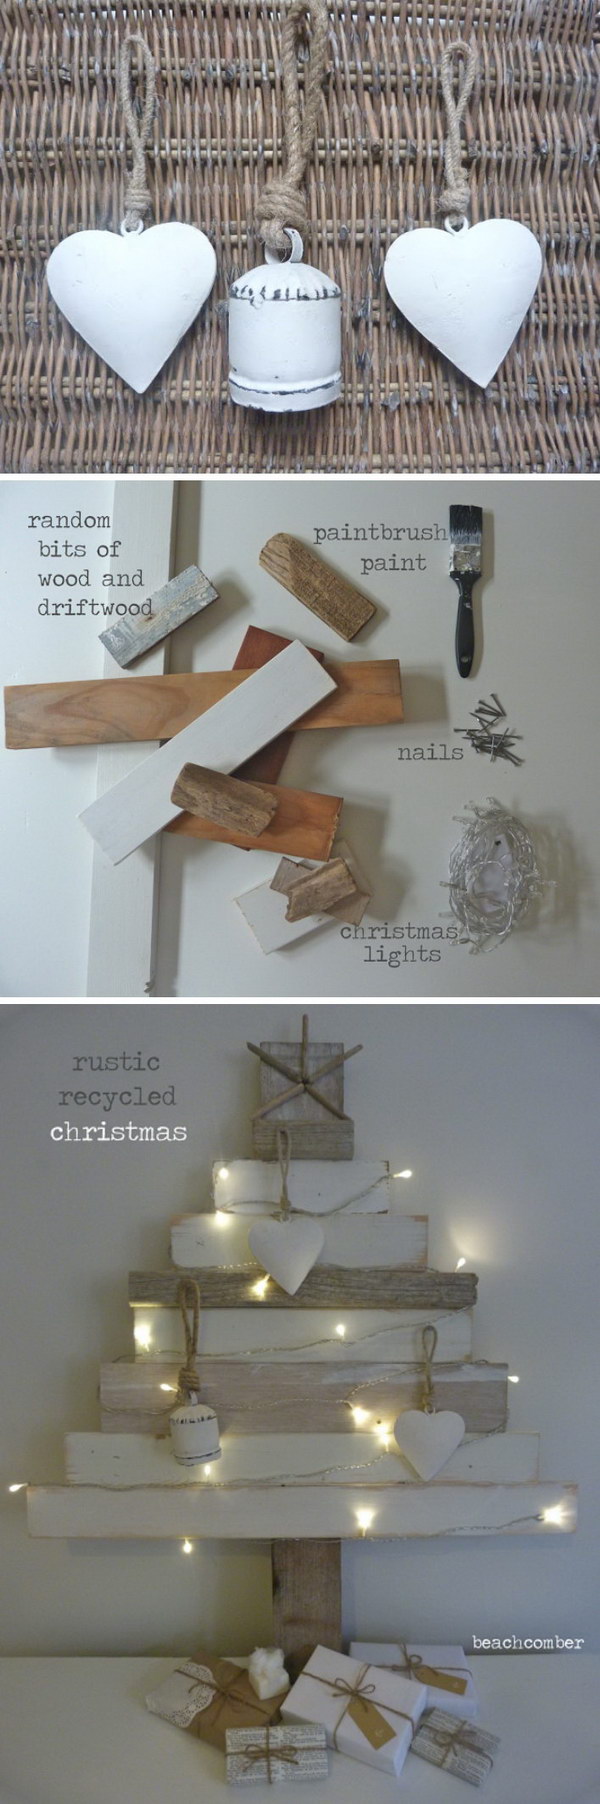 Christmas Tree Recycled From Scraps Of Old Wood & Driftwood. 